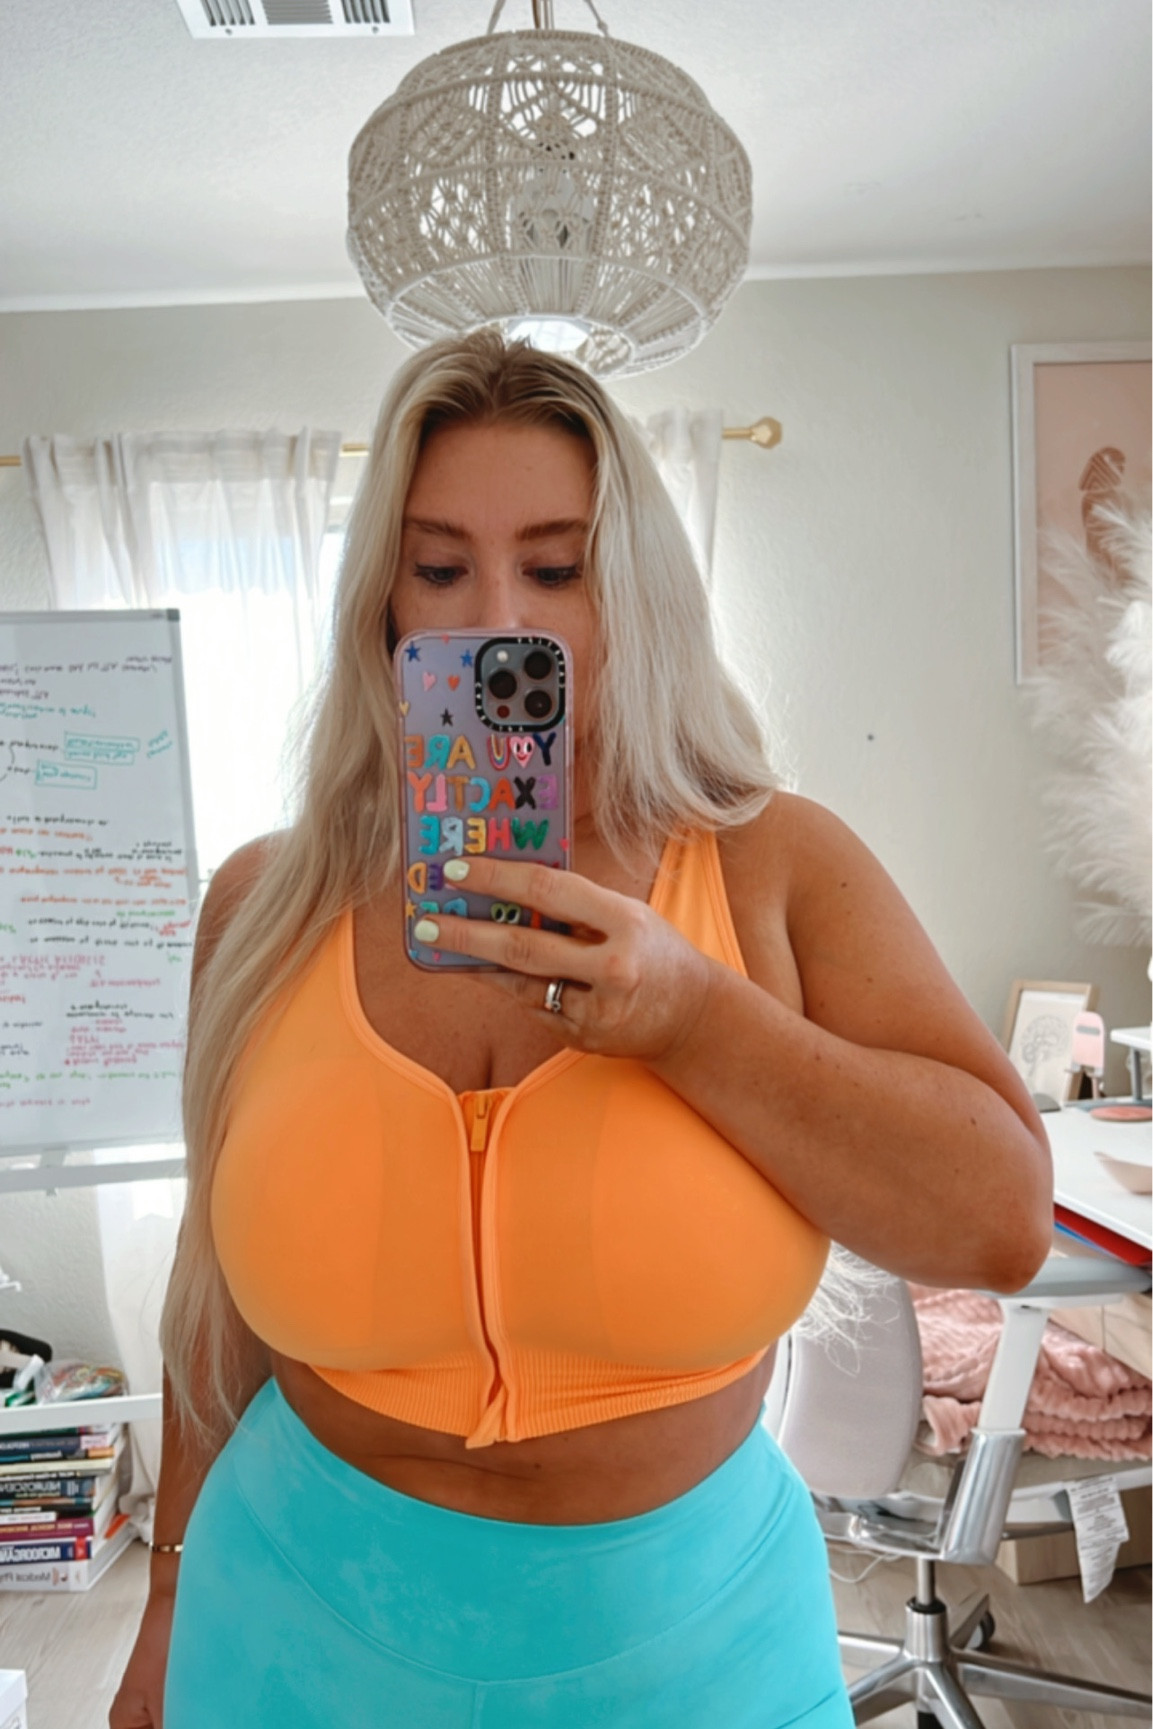 GYMSHARK TRY ON HAUL & SIZE GUIDE FOR SIZE 12 - 14  SIZE MEDIUM OR  LARGE??? **PETITE AND CURVY** 